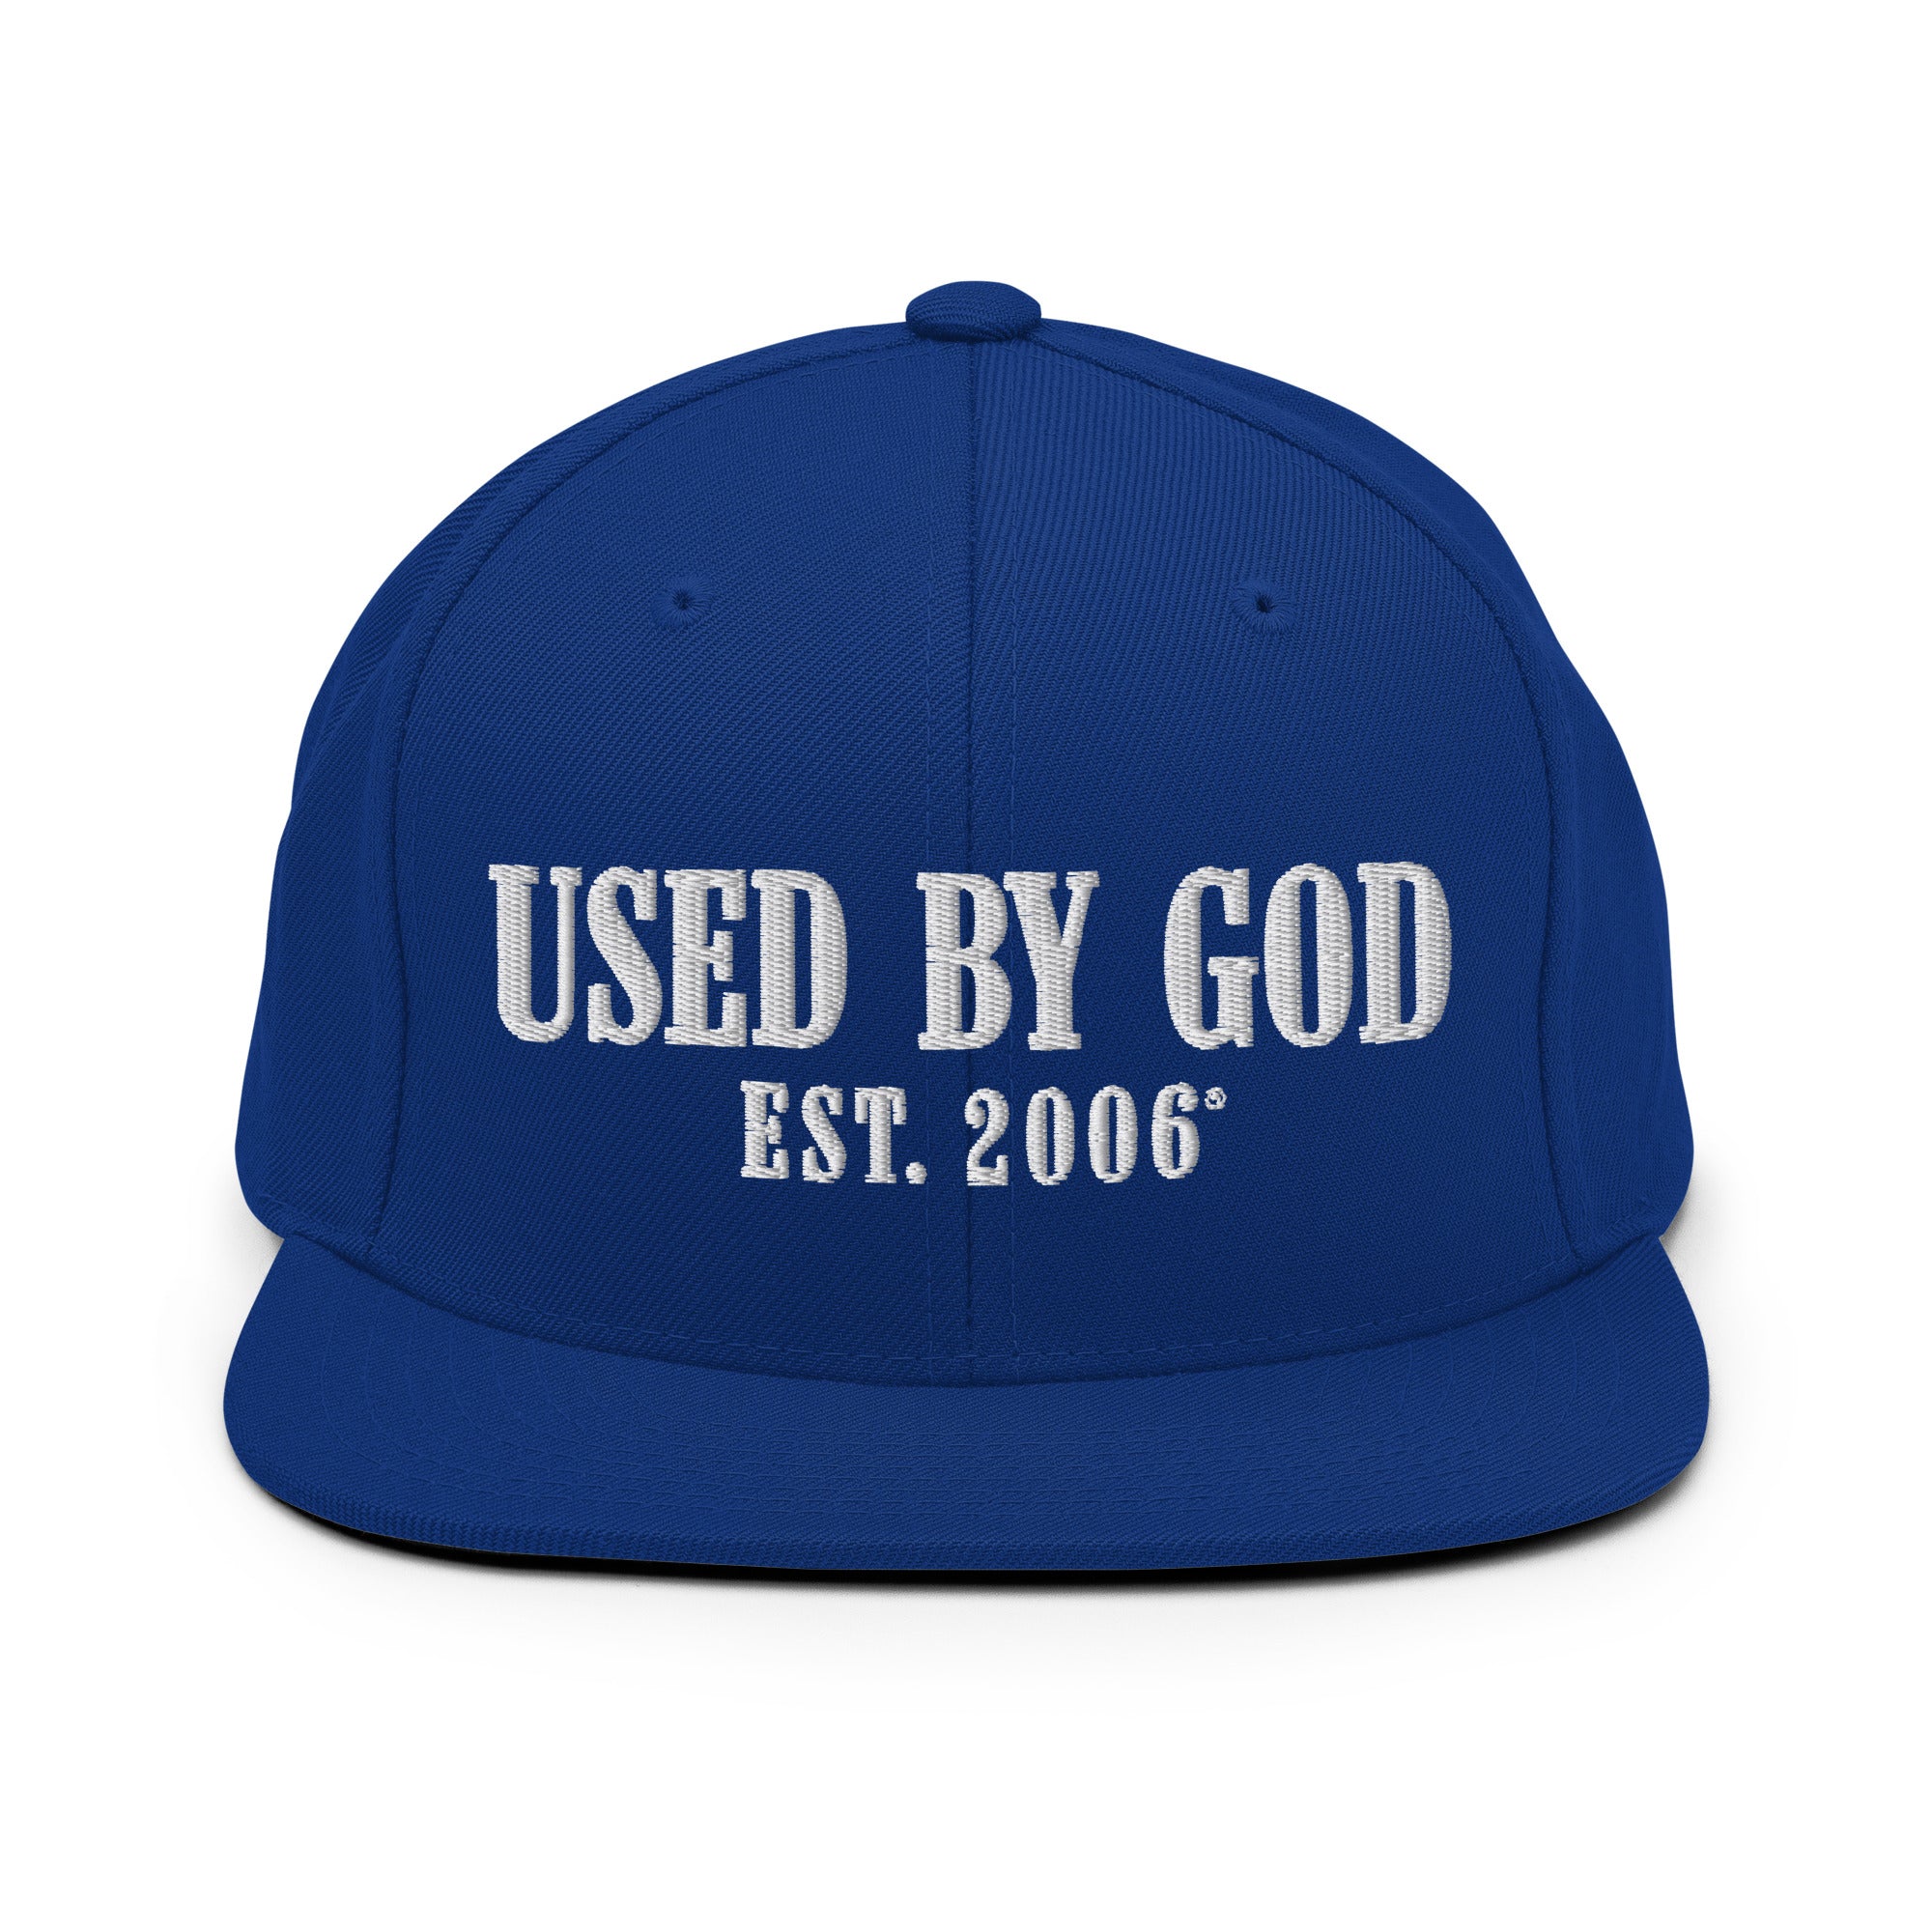 Used By God Est. 2006 Snapback Hat, Used By God, Used By God Clothing, Christian Apparel, Christian Hats, Christian T-Shirts, Christian Clothing, God Shirts, Christian Sweatshirts, God Clothing, Jesus Hoodie, Jesus Clothes, God Is Dope, Art Of Homage, Red Letter Clothing, Elevated Faith, Active Faith Sports, Beacon Threads, God The Father Apparel